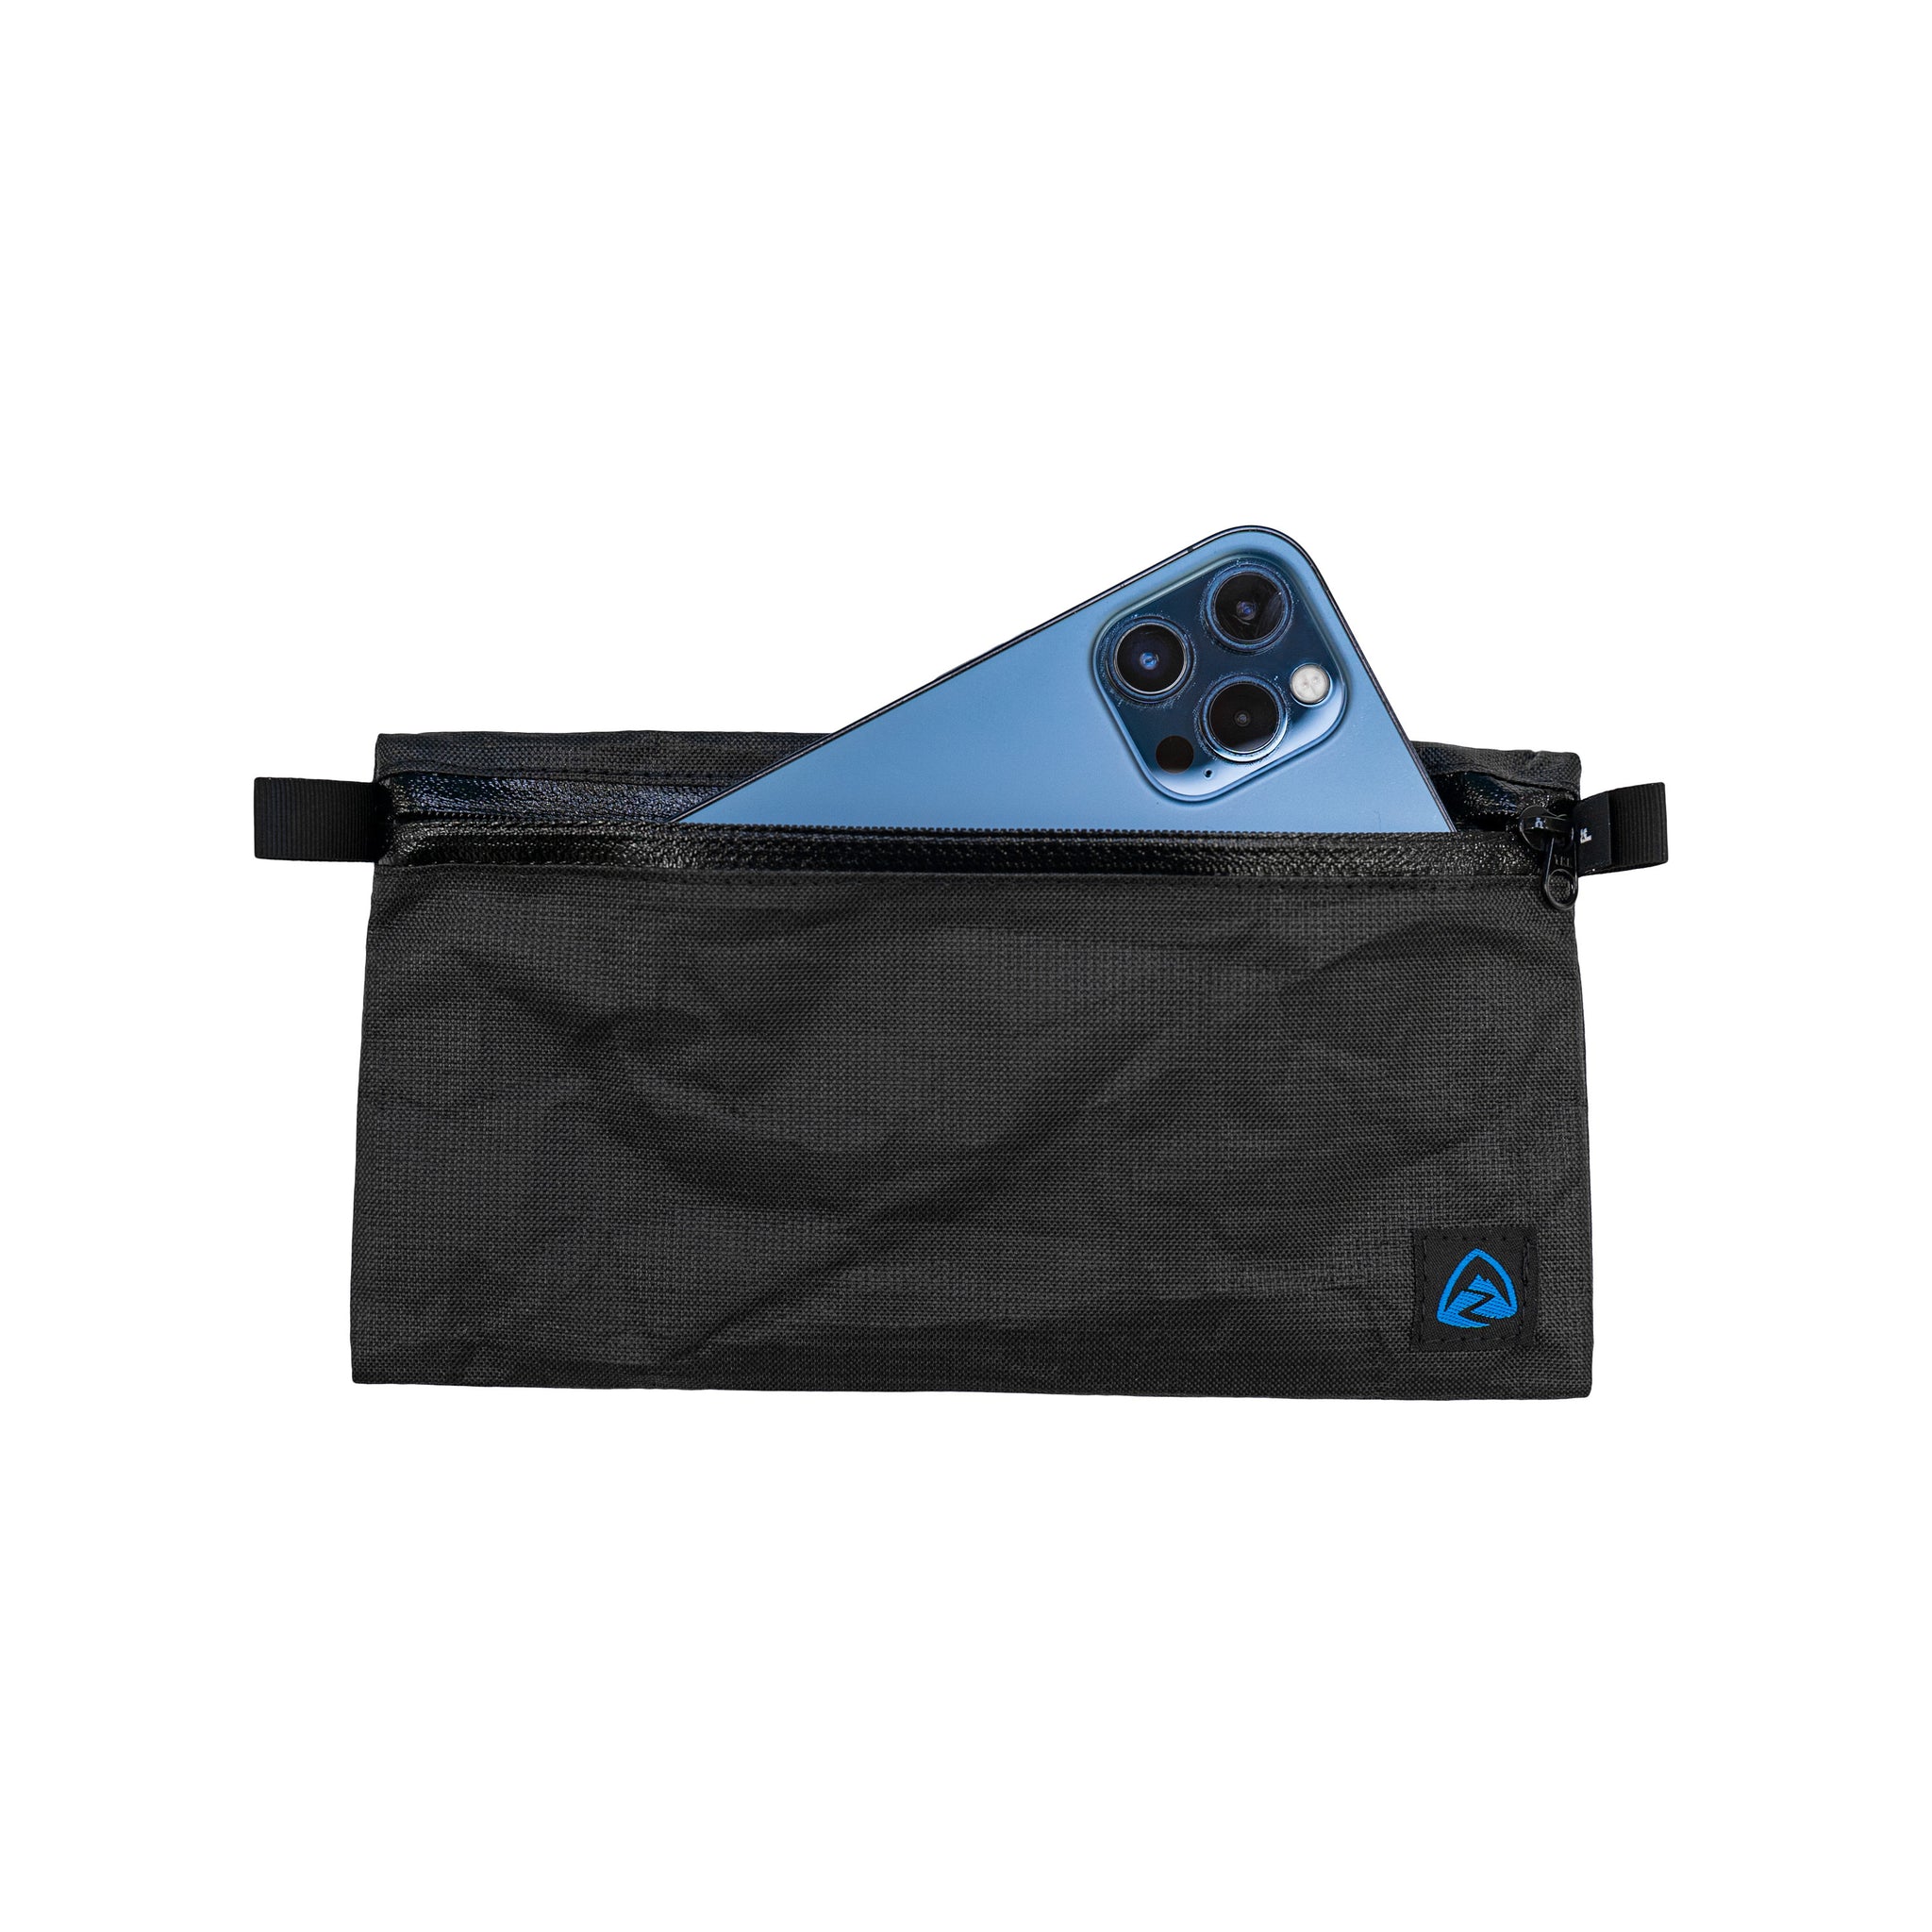 Phone and Tablet pouch for 6 gadgets or iPhone plus, wallet, keys and  tools -belt pouch and shoulder bag